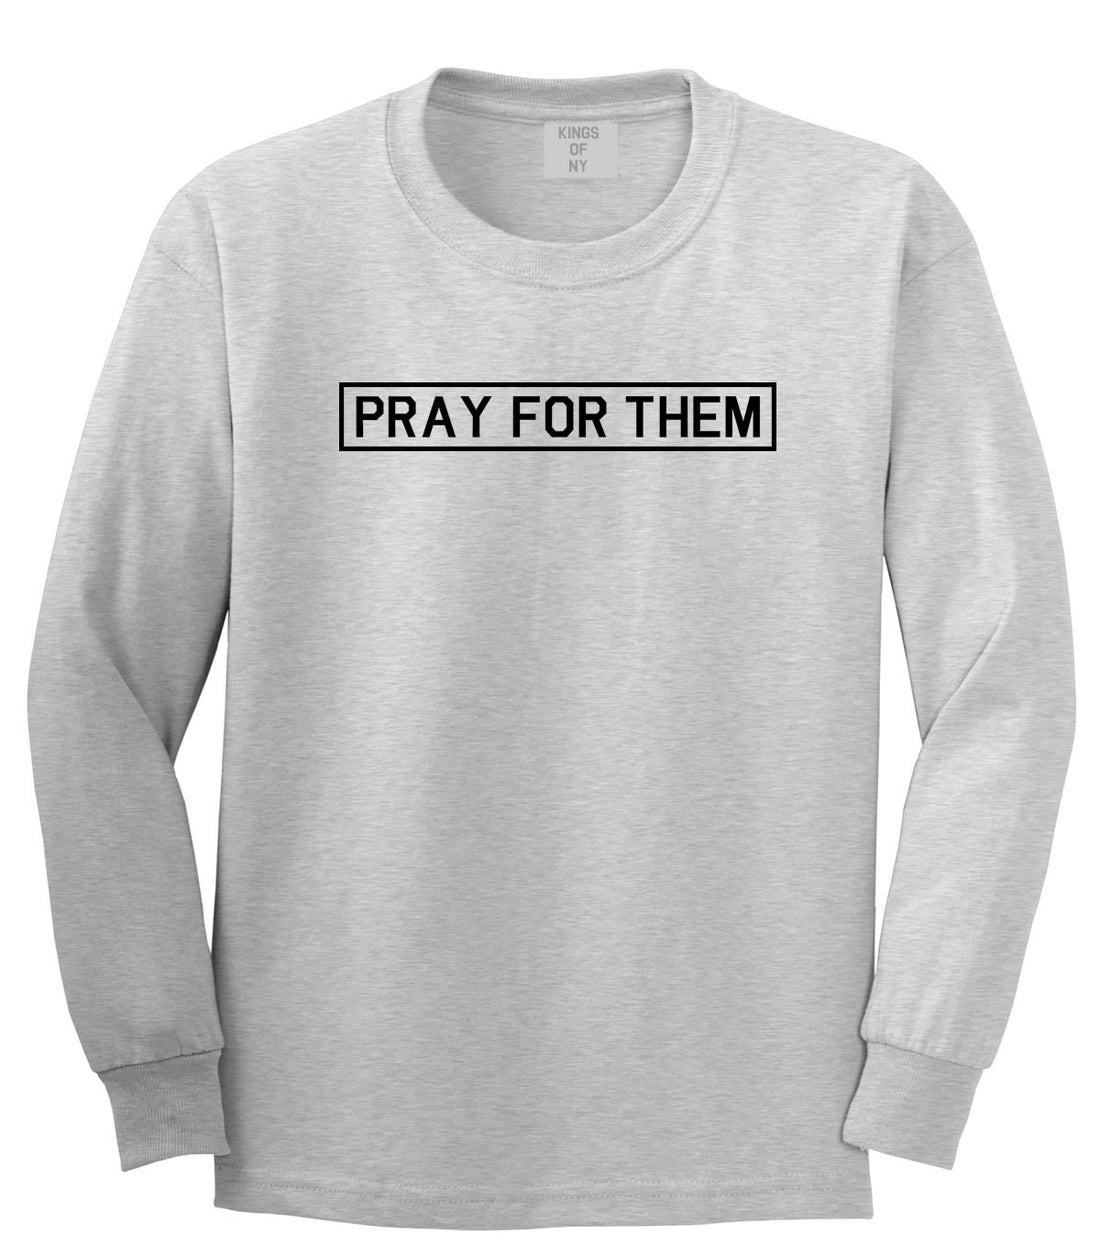 Pray For Them Fall15 Boys Kids Long Sleeve T-Shirt in Grey by Kings Of NY